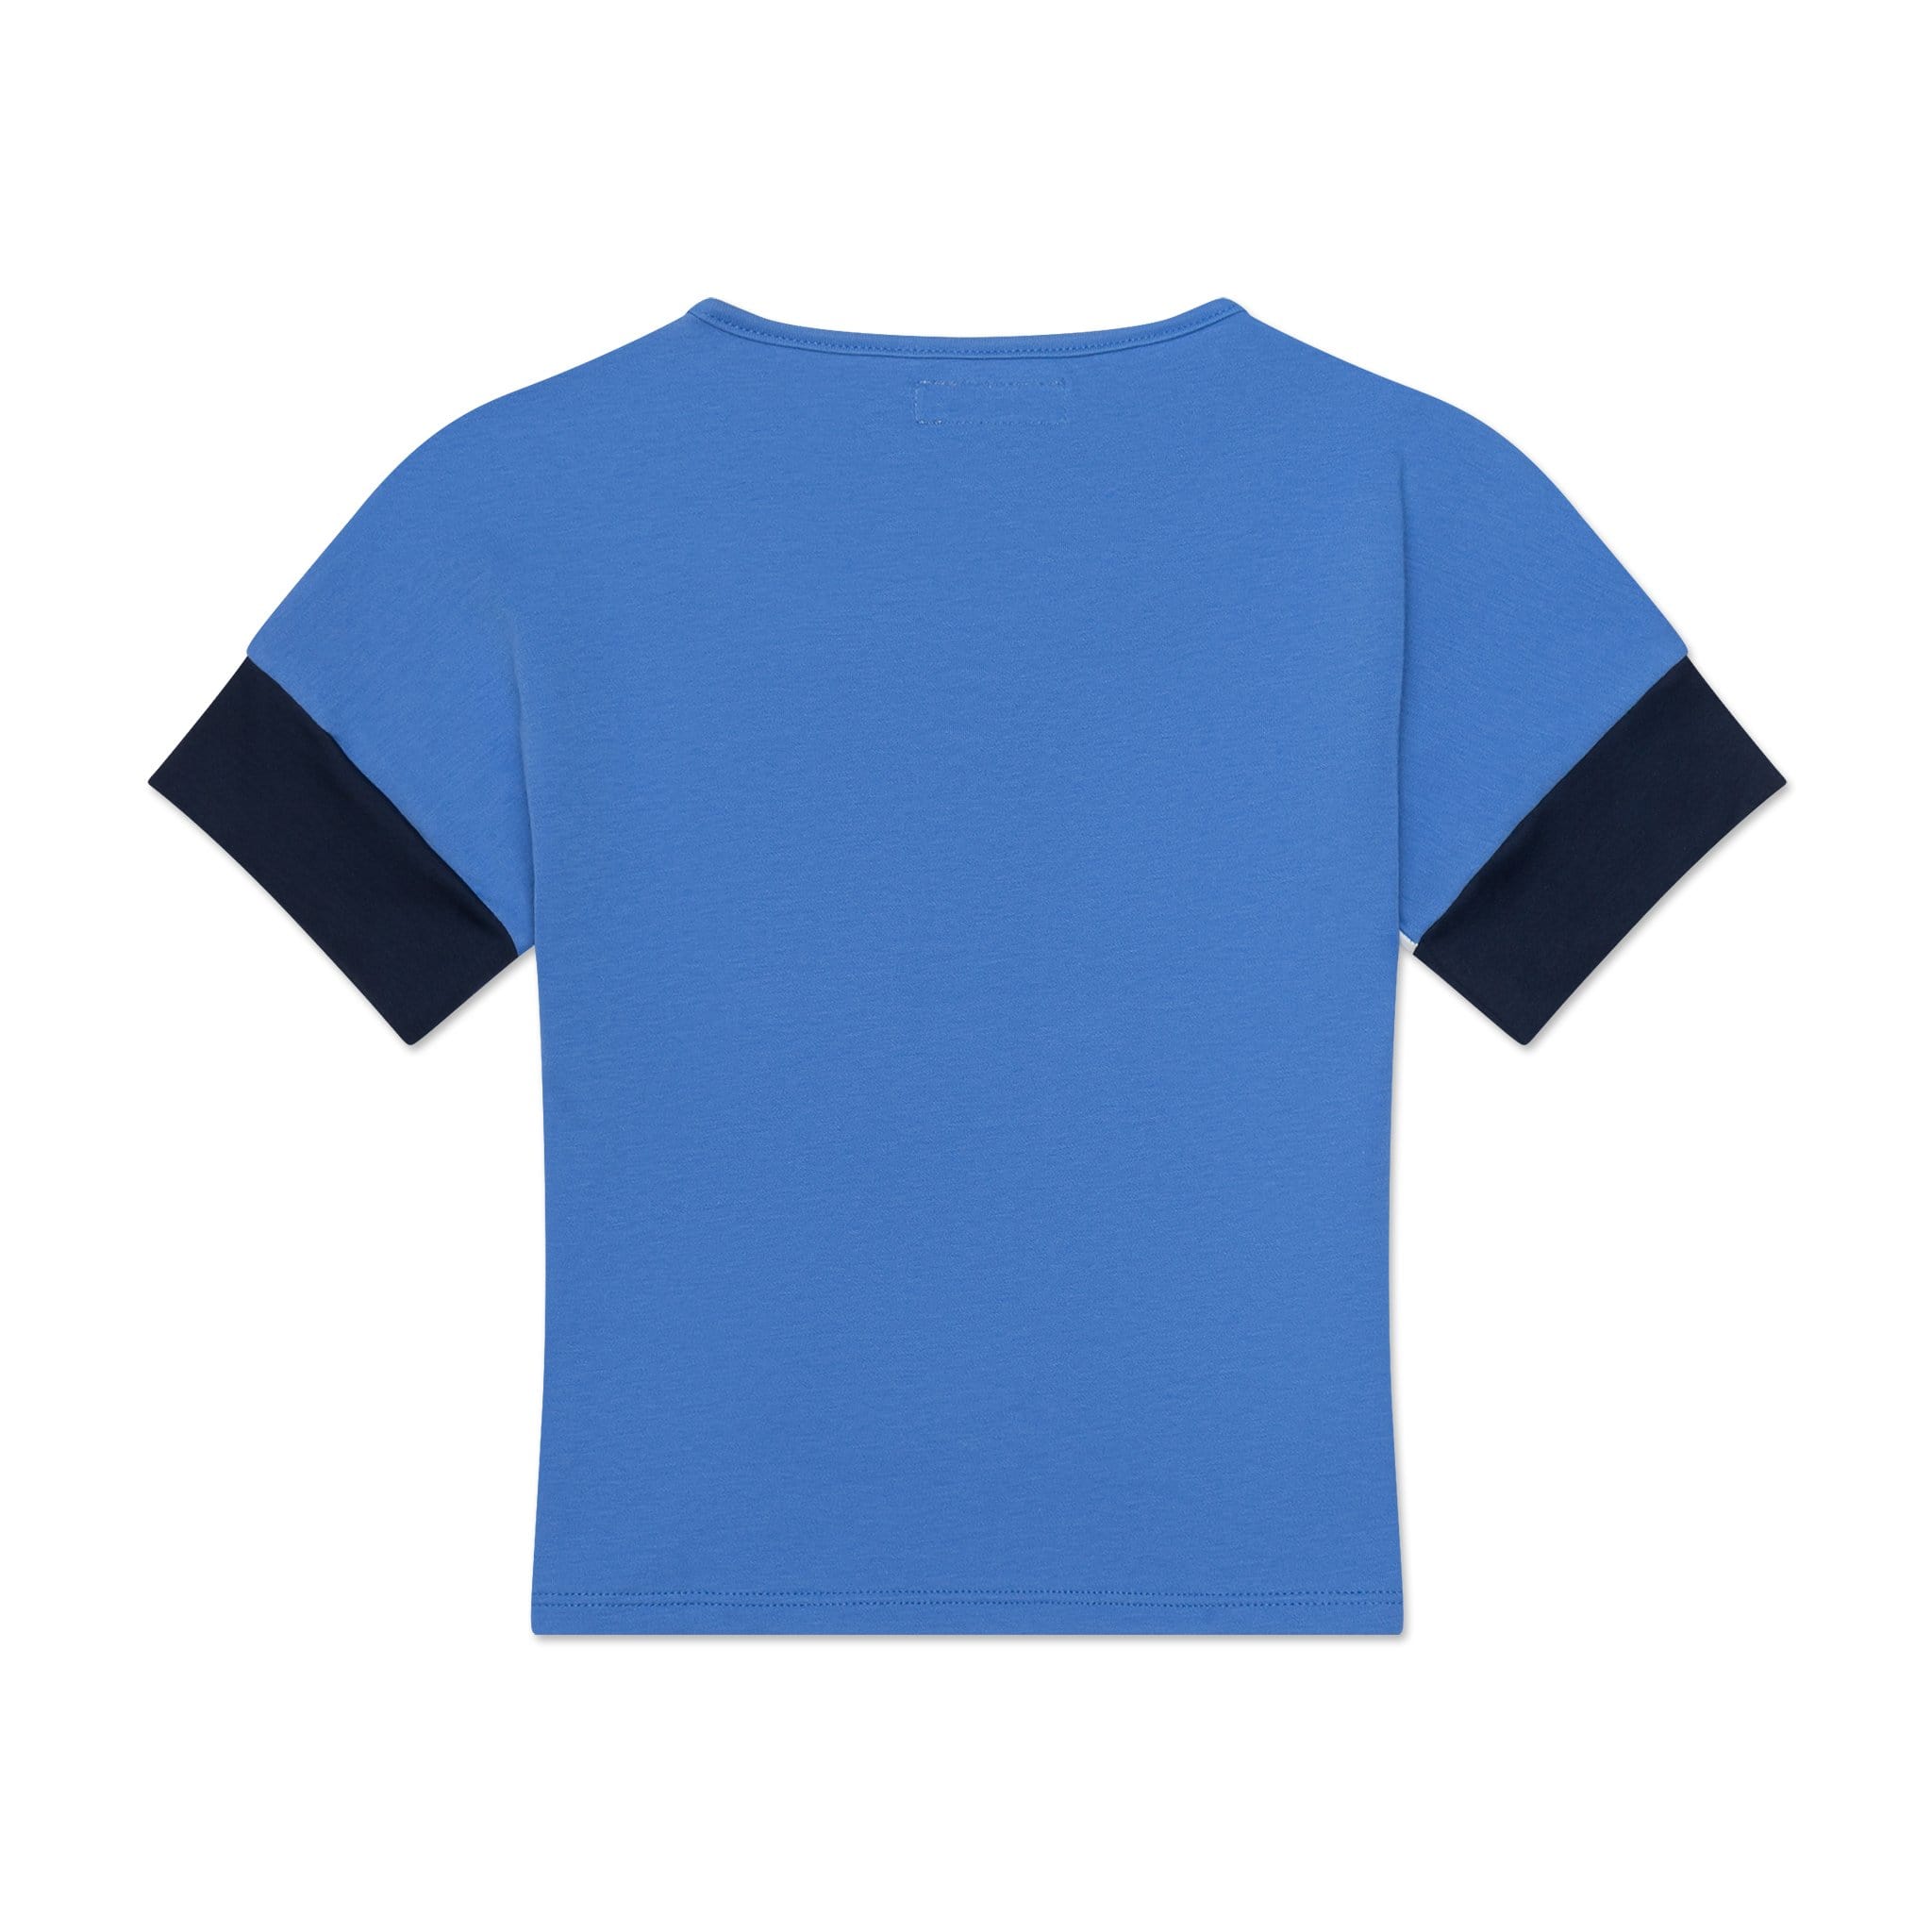 Girls tee that is durable, sustainable, and eco-friendly. Made from organic cotton. White, blue, and navy colorblock.